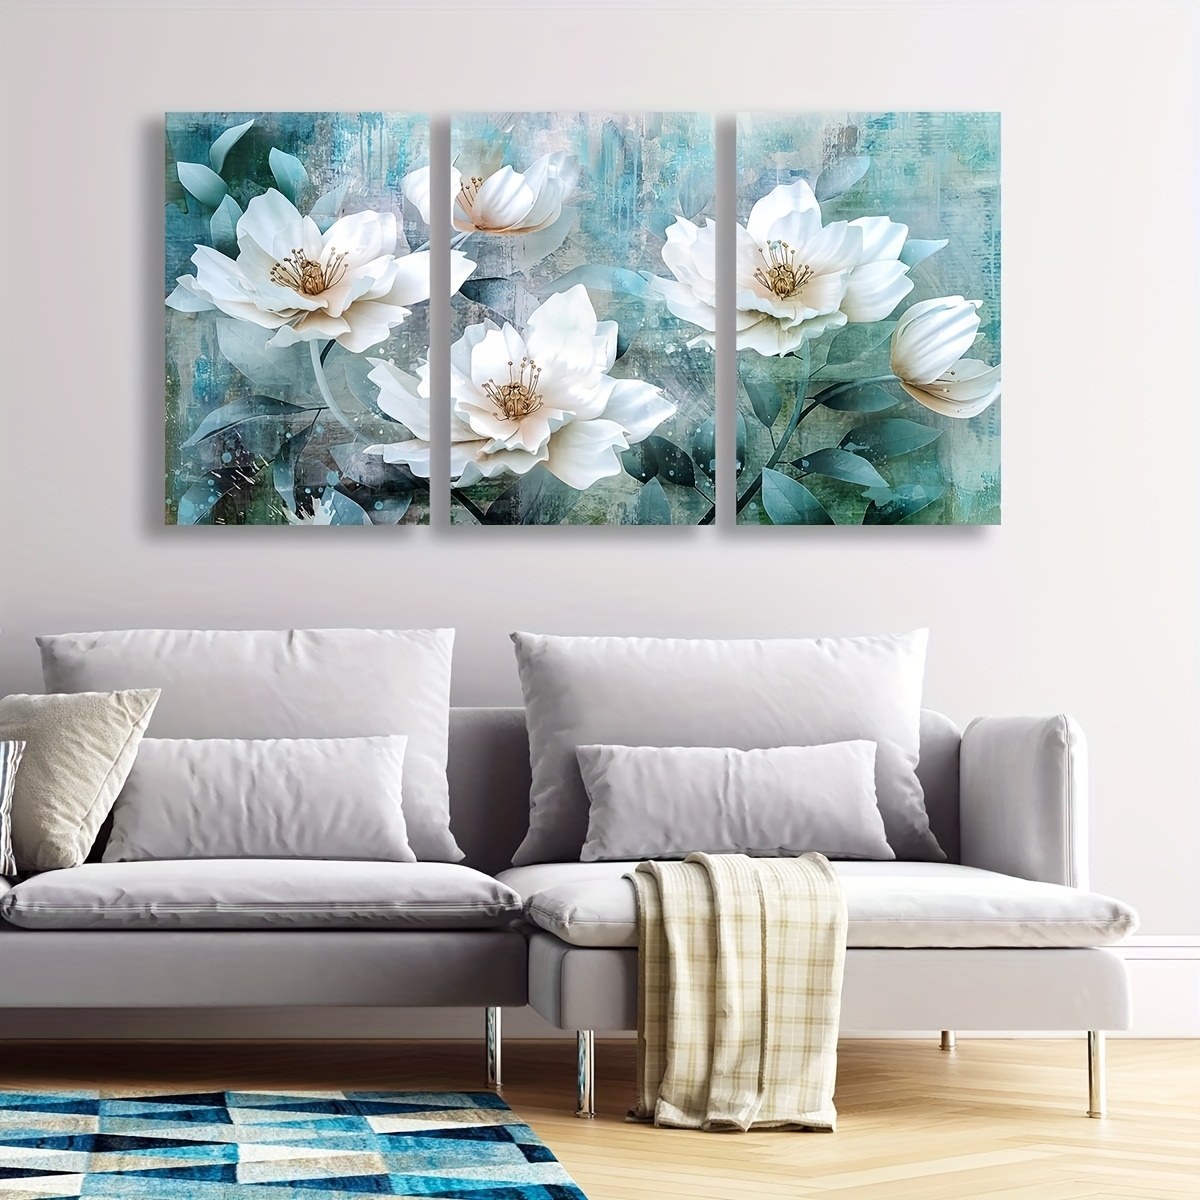  Canvas Wall Art for Living Room, Rustic Floral Framed Wall Art  Printed Modern Wall Painting for Bedroom Kitchen Office Decor Ready to Hang  24x24 Rural Butterfly Flower Aqua Backdrop: Posters 